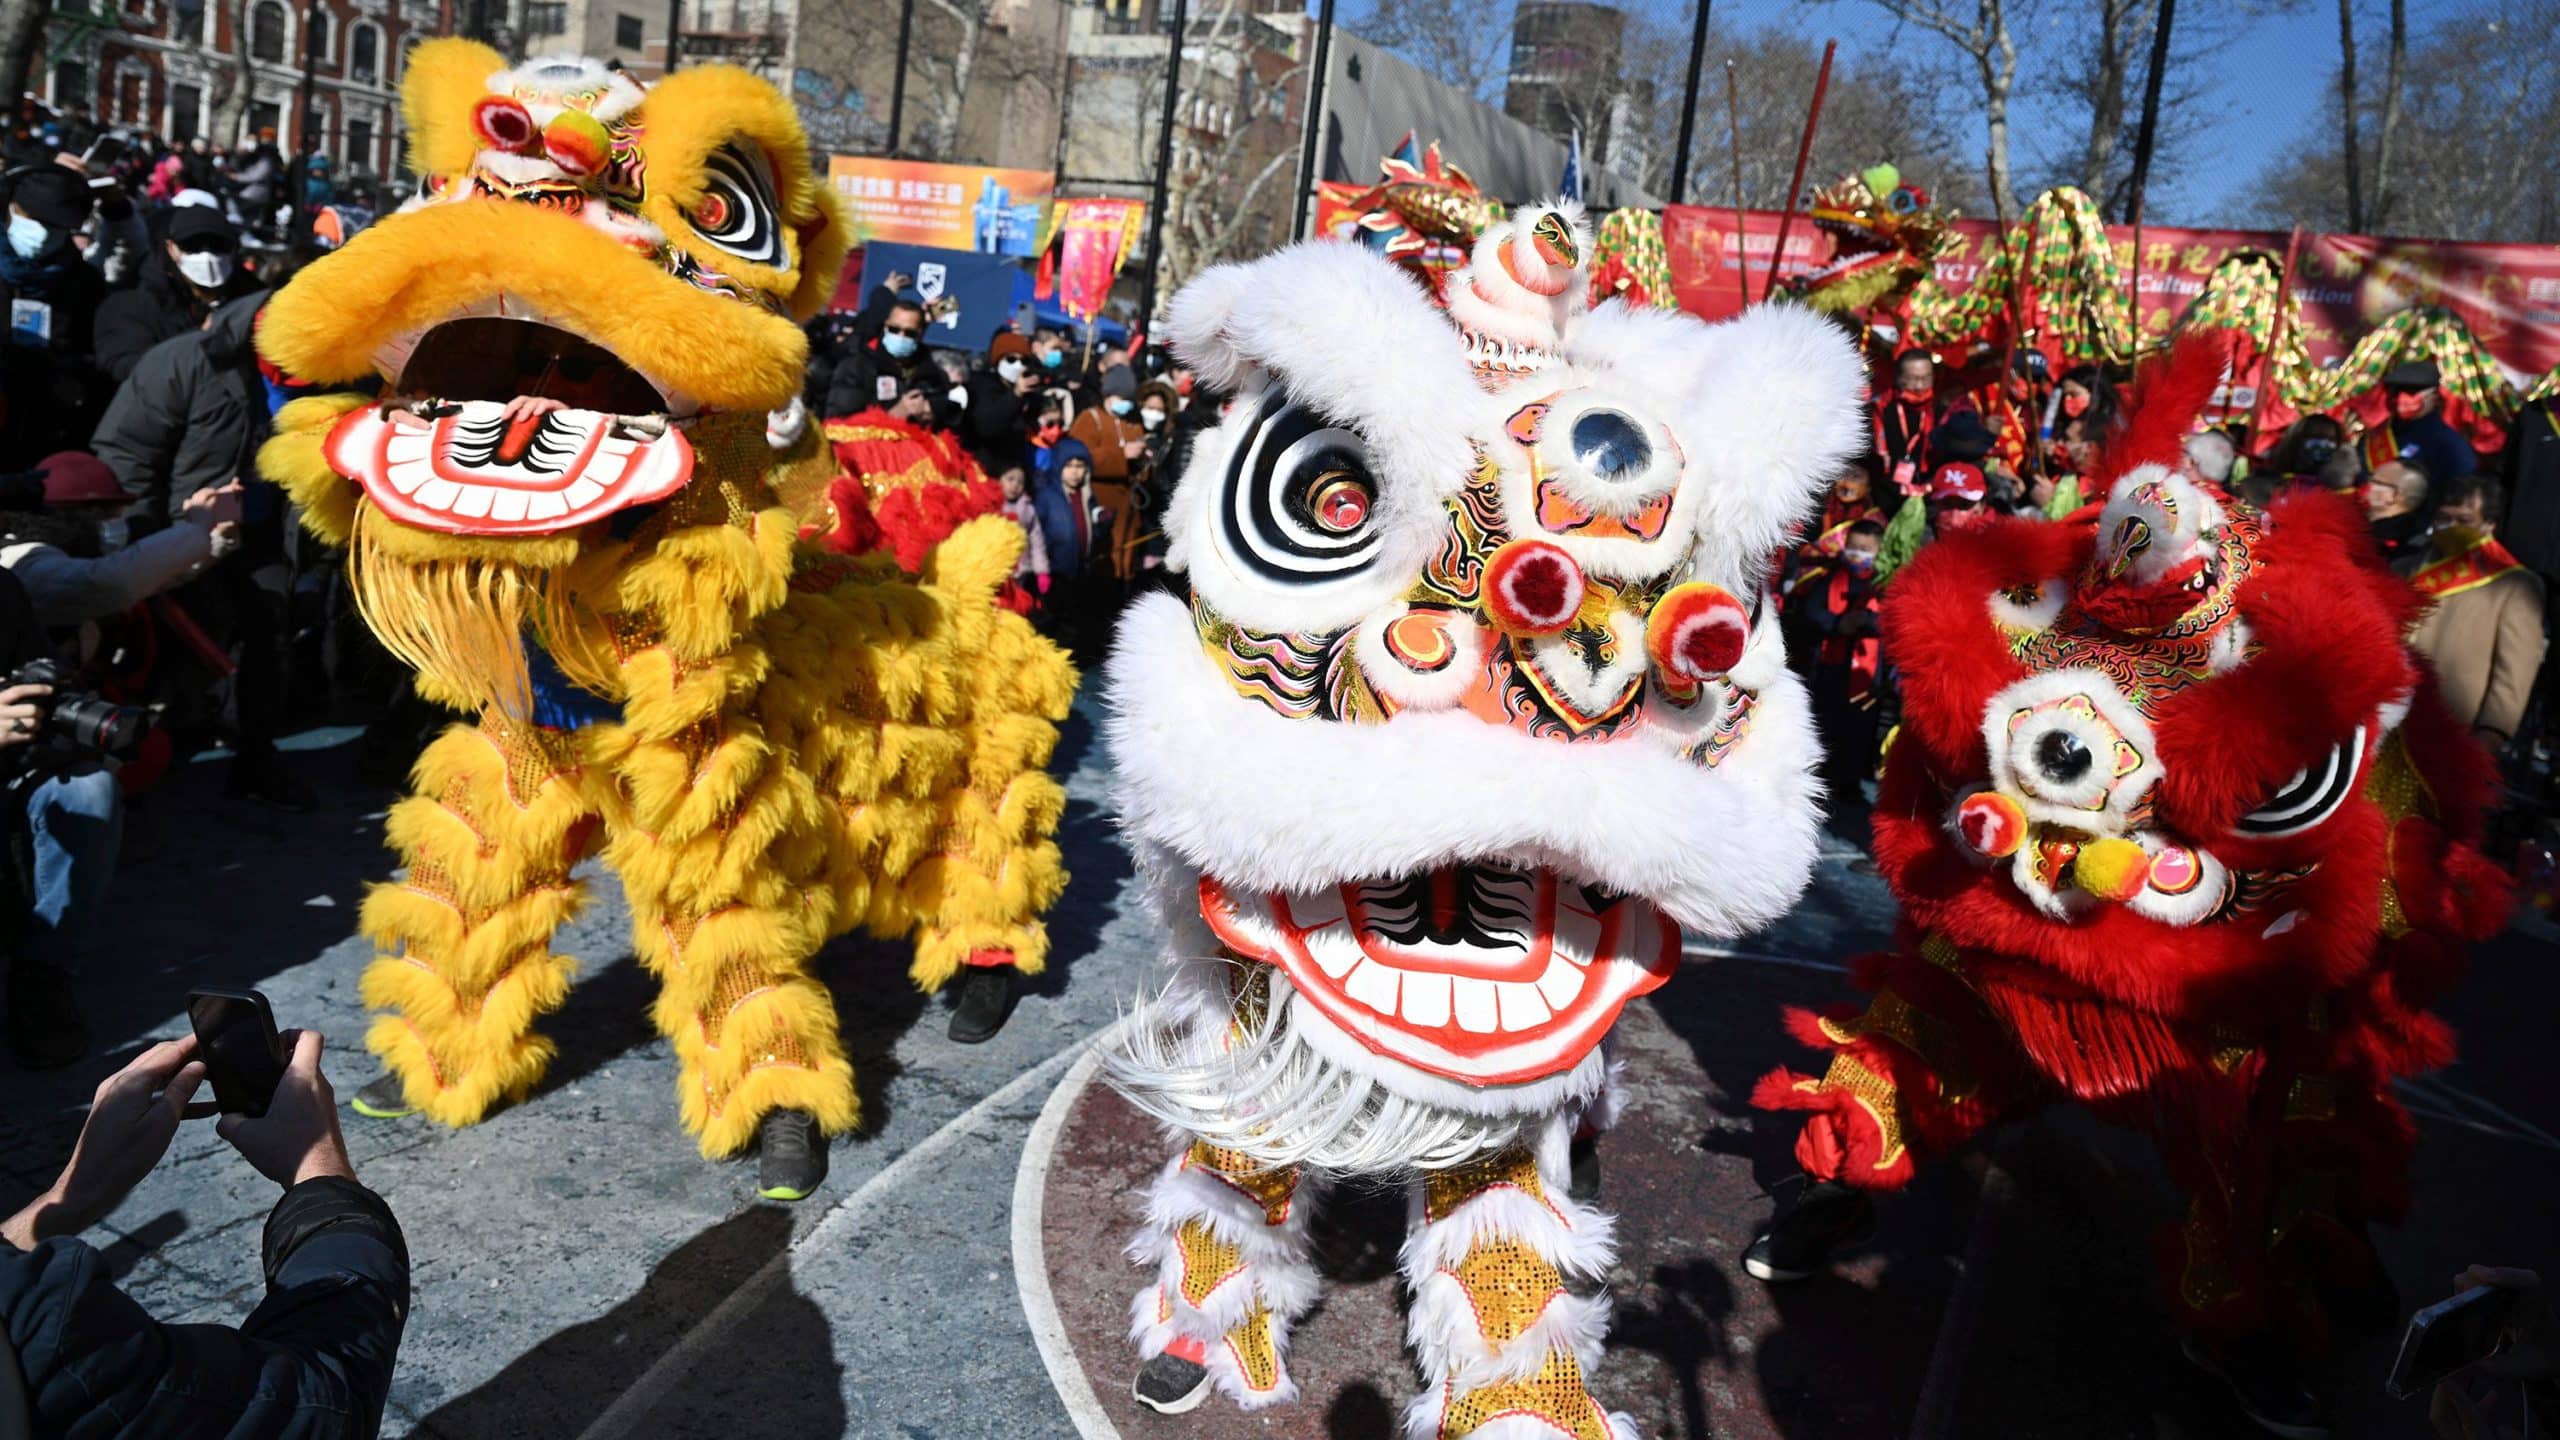 Best things to do in New York City in February
Chinese Lunar New Year Parade